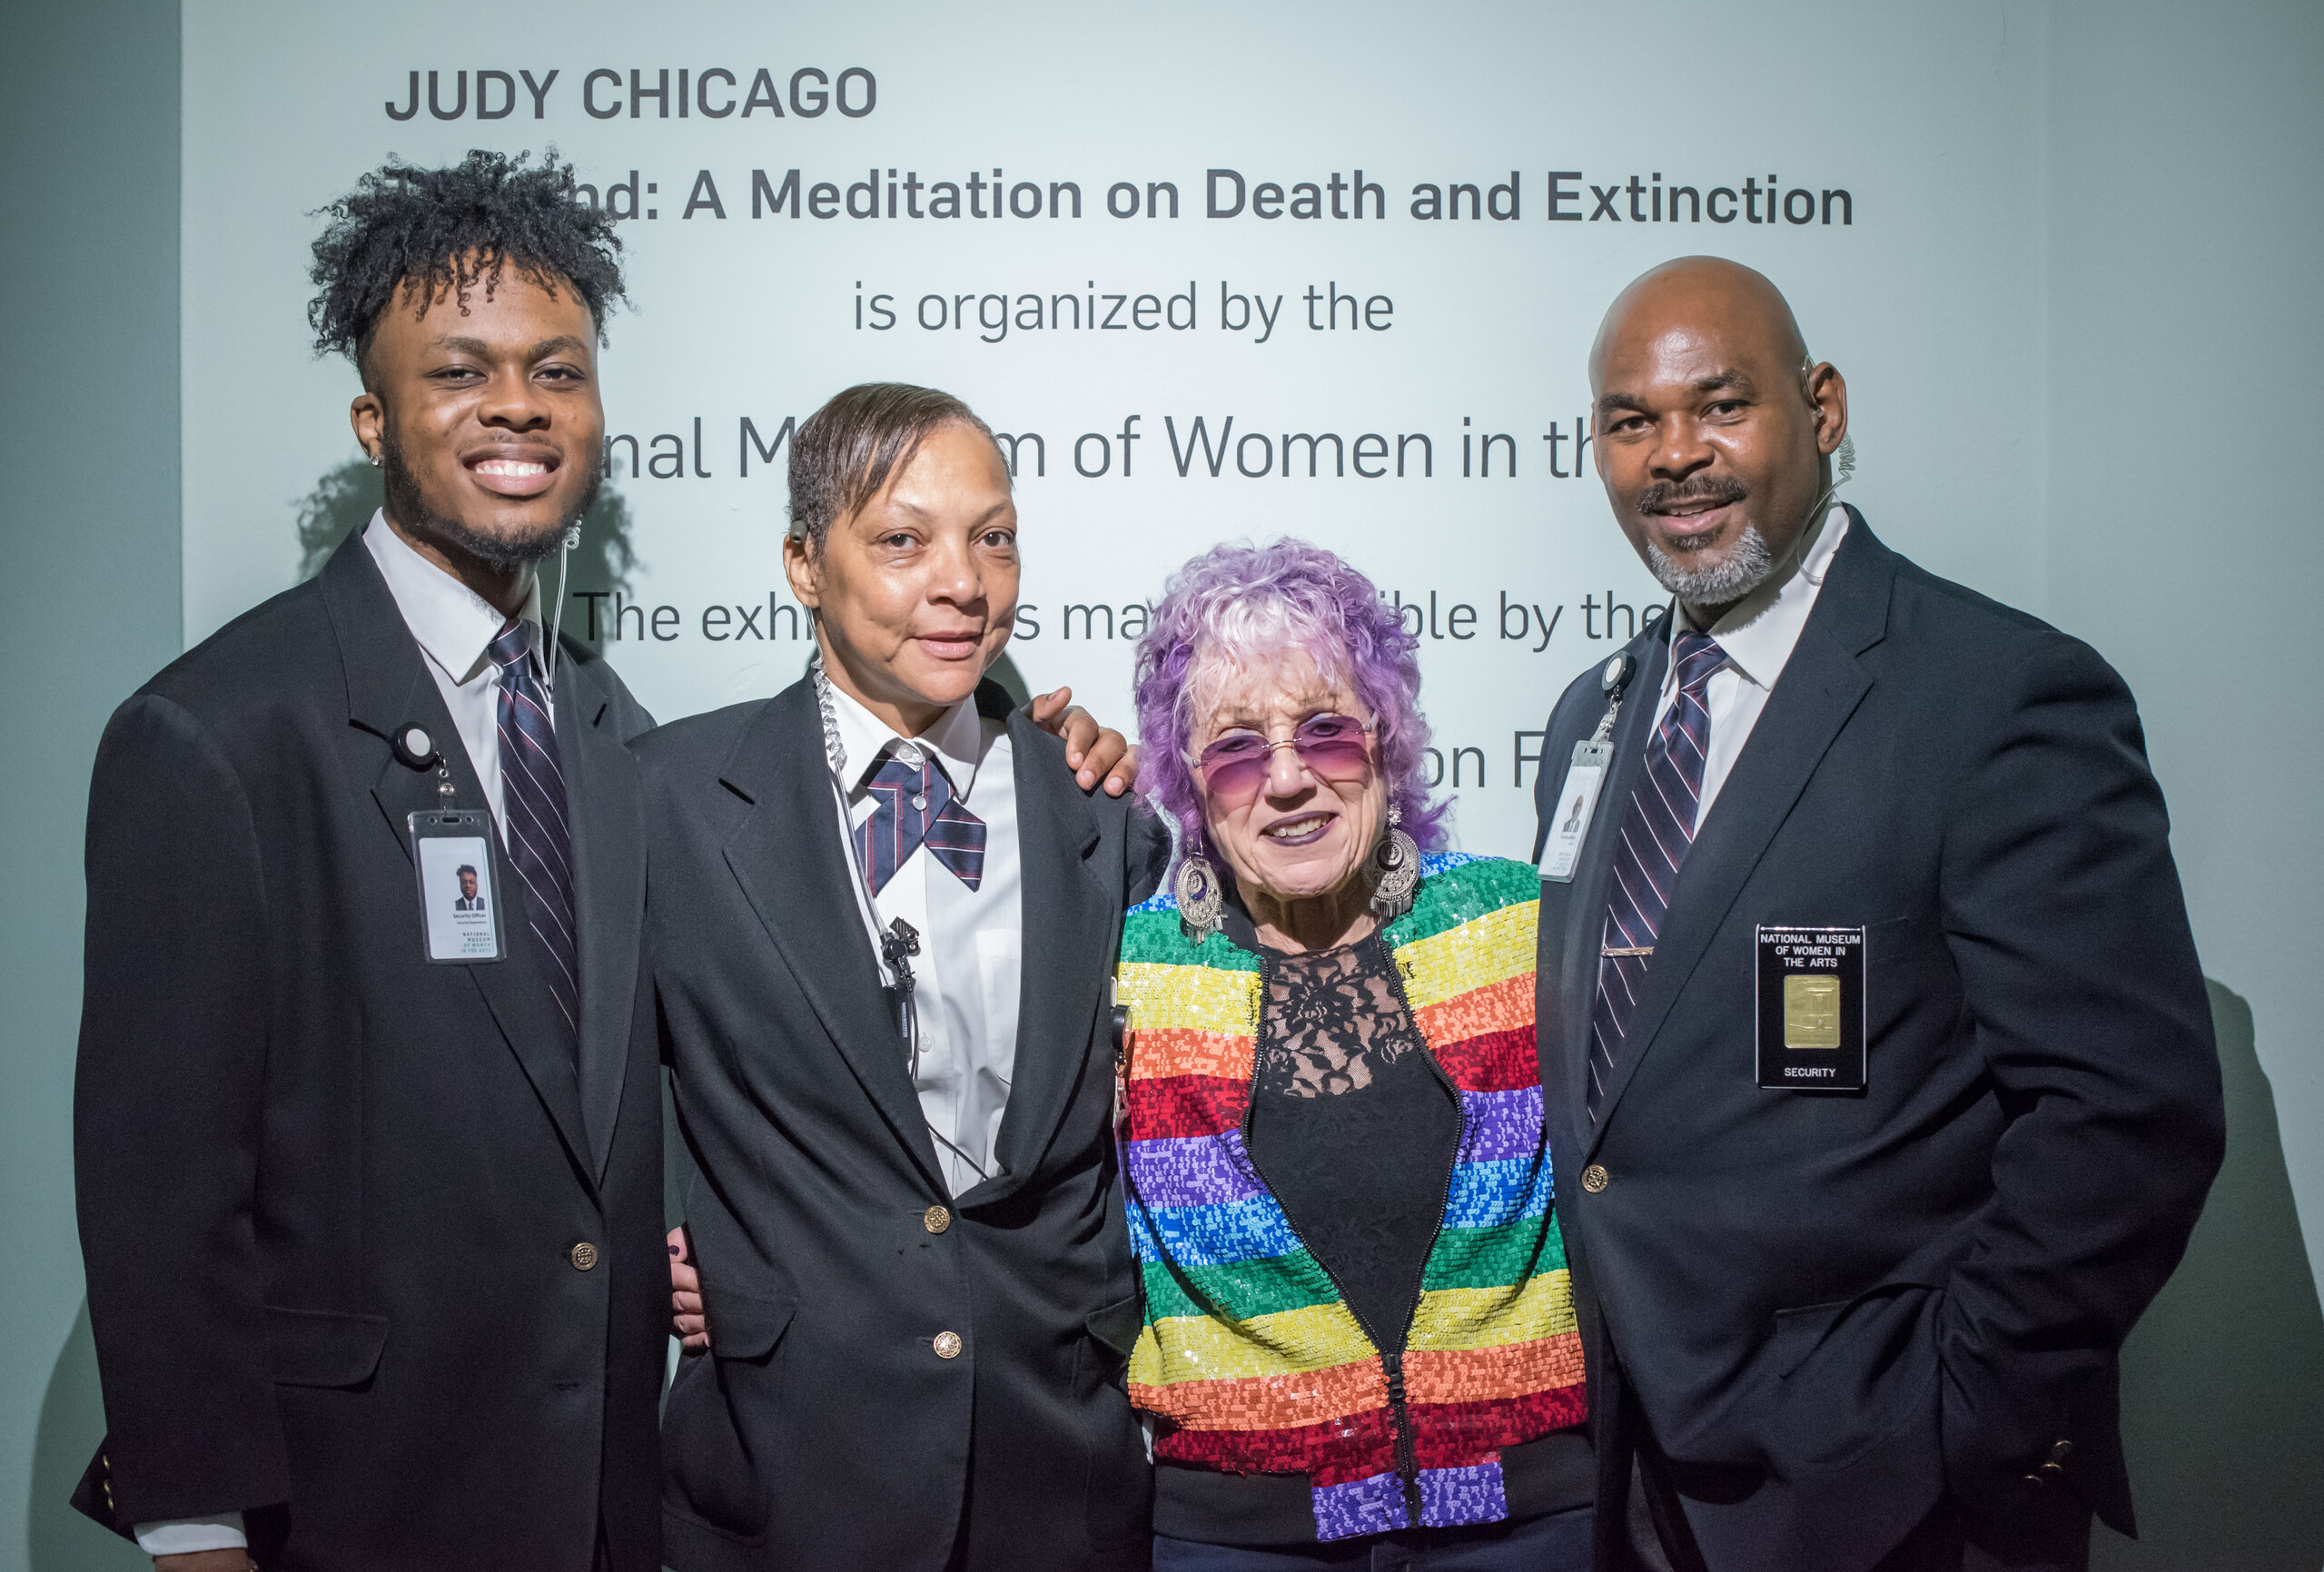 Three Security Officers and artist Judy Chicago stand next to each other smiling in front of opening text to the artist's exhibition.